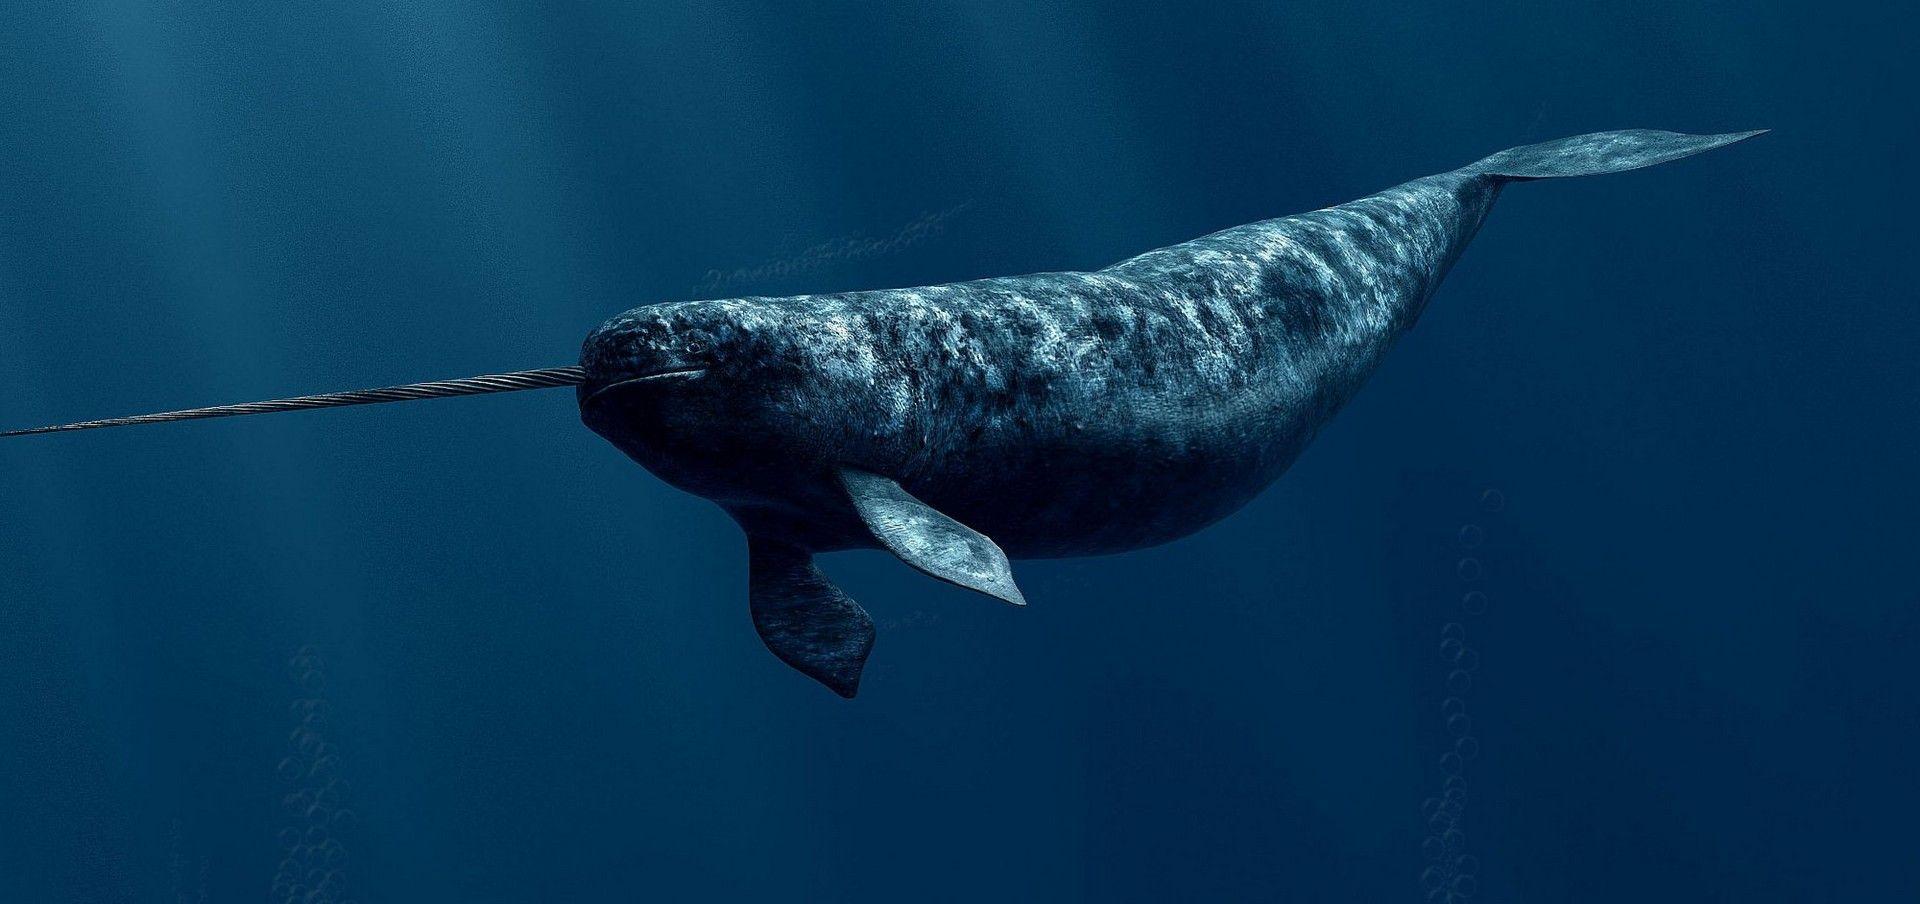 Narwhal Wallpapers Wallpaper Cave Images, Photos, Reviews